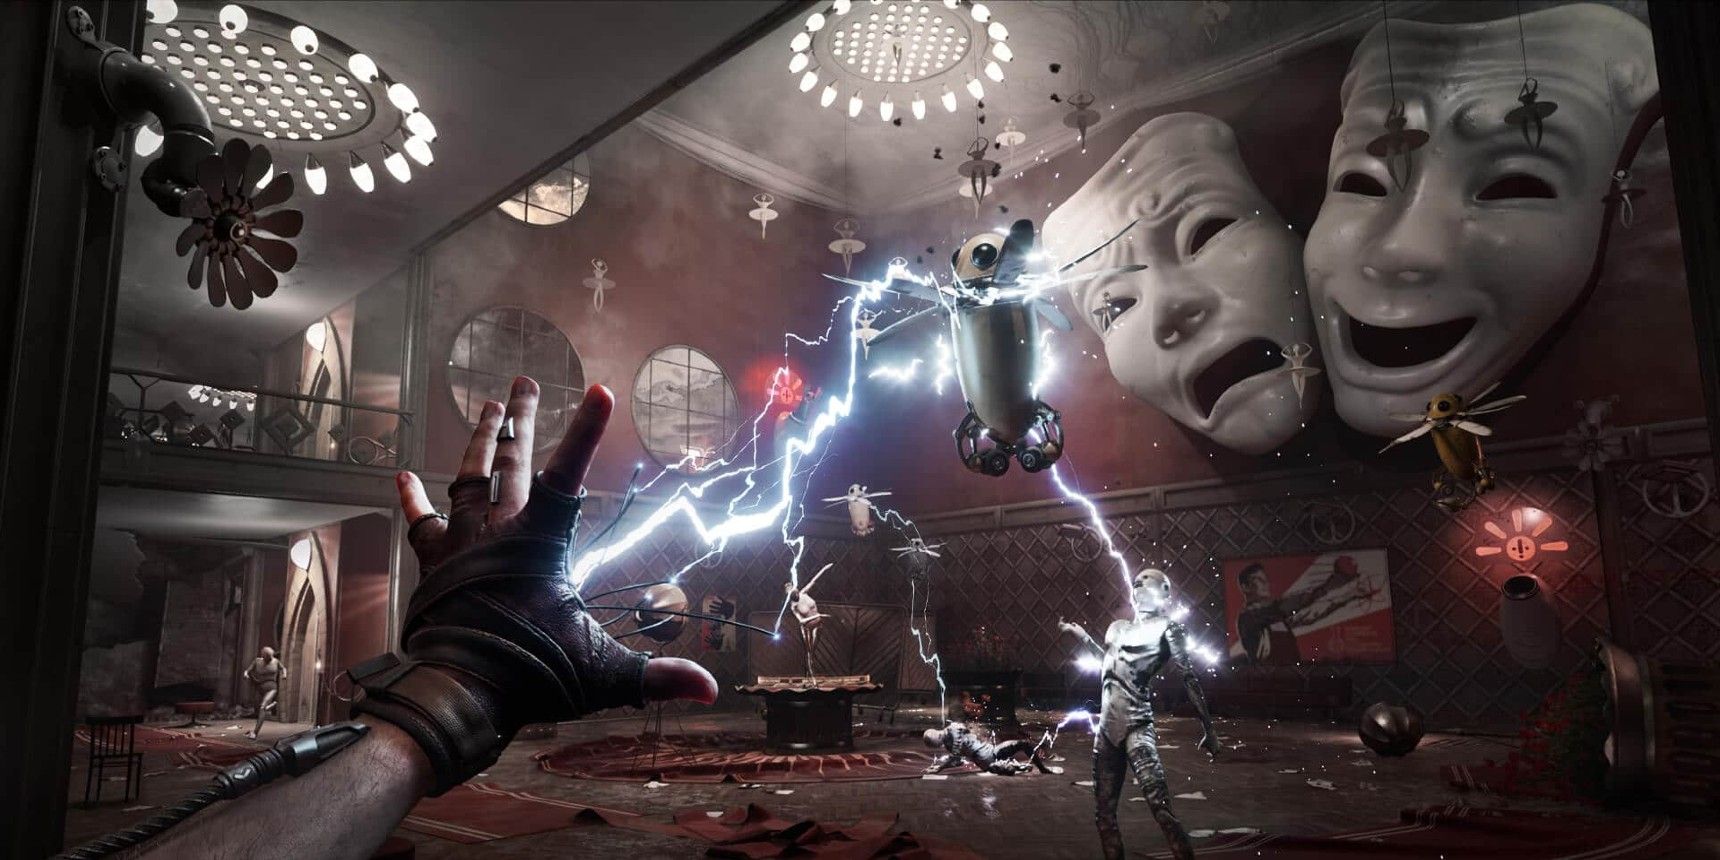 Atomic Heart: How Long Does It Take To Beat?